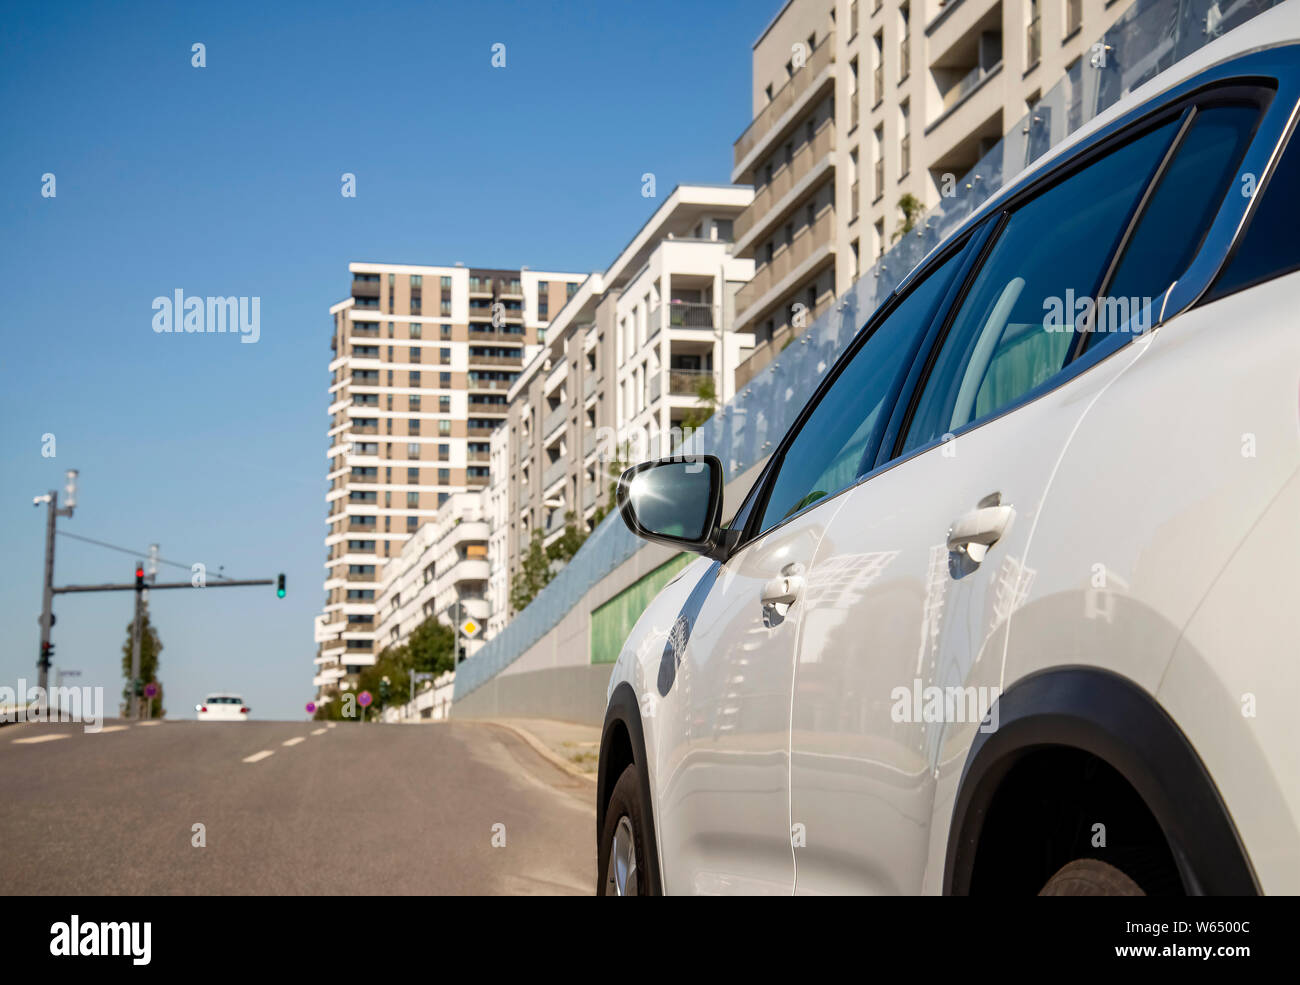 SUV on the street of a modern city Stock Photo